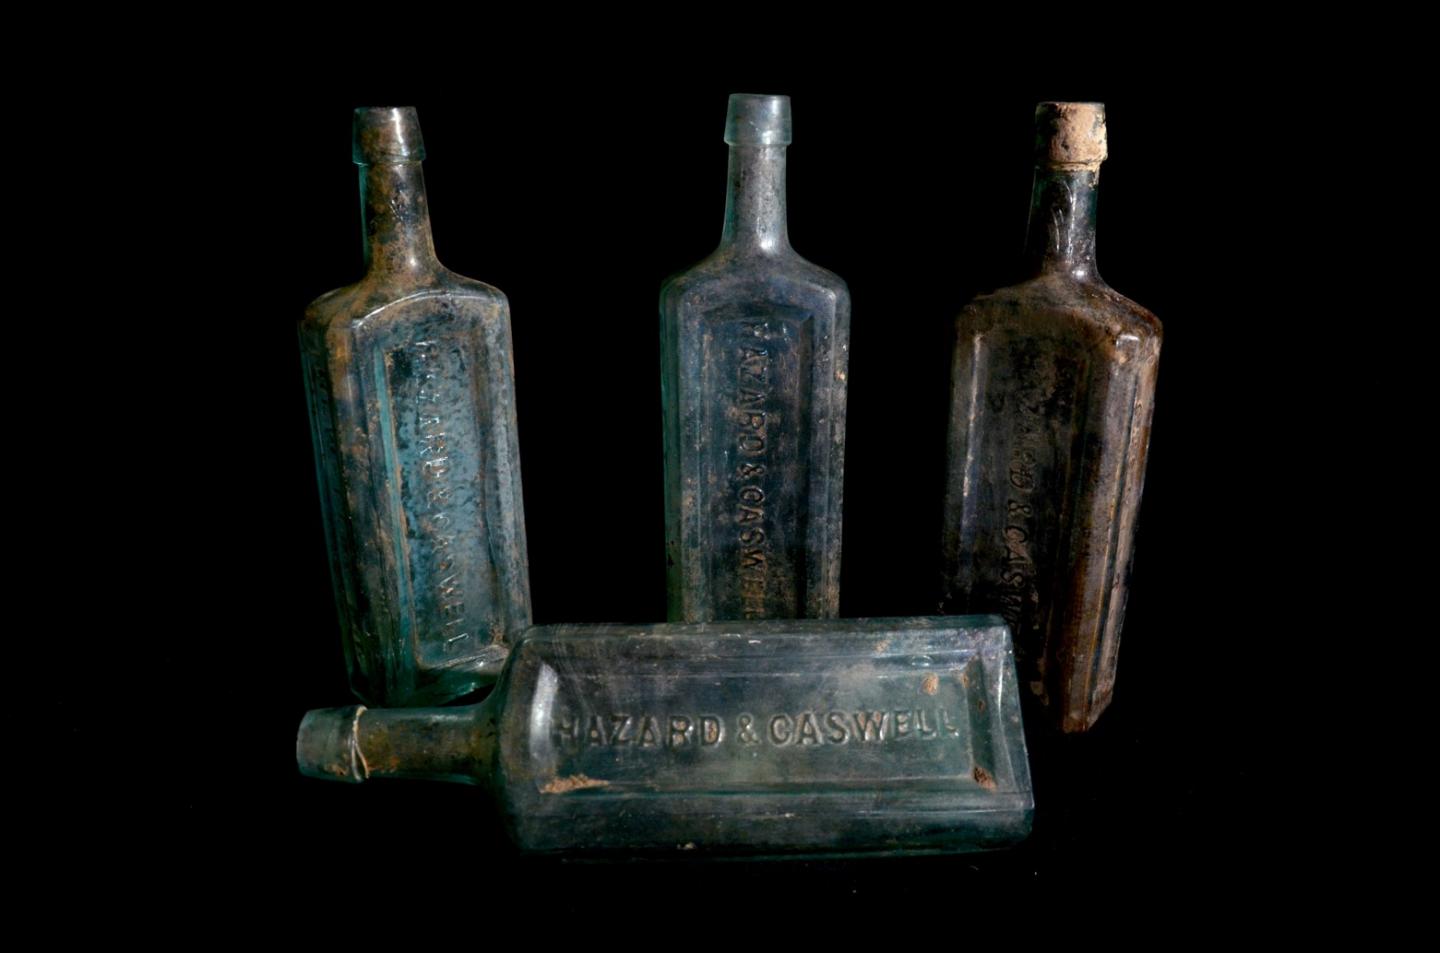 Hazard & Caswell bottles were one of the artifacts found in the privy once attached to the Ripley/Choate House.